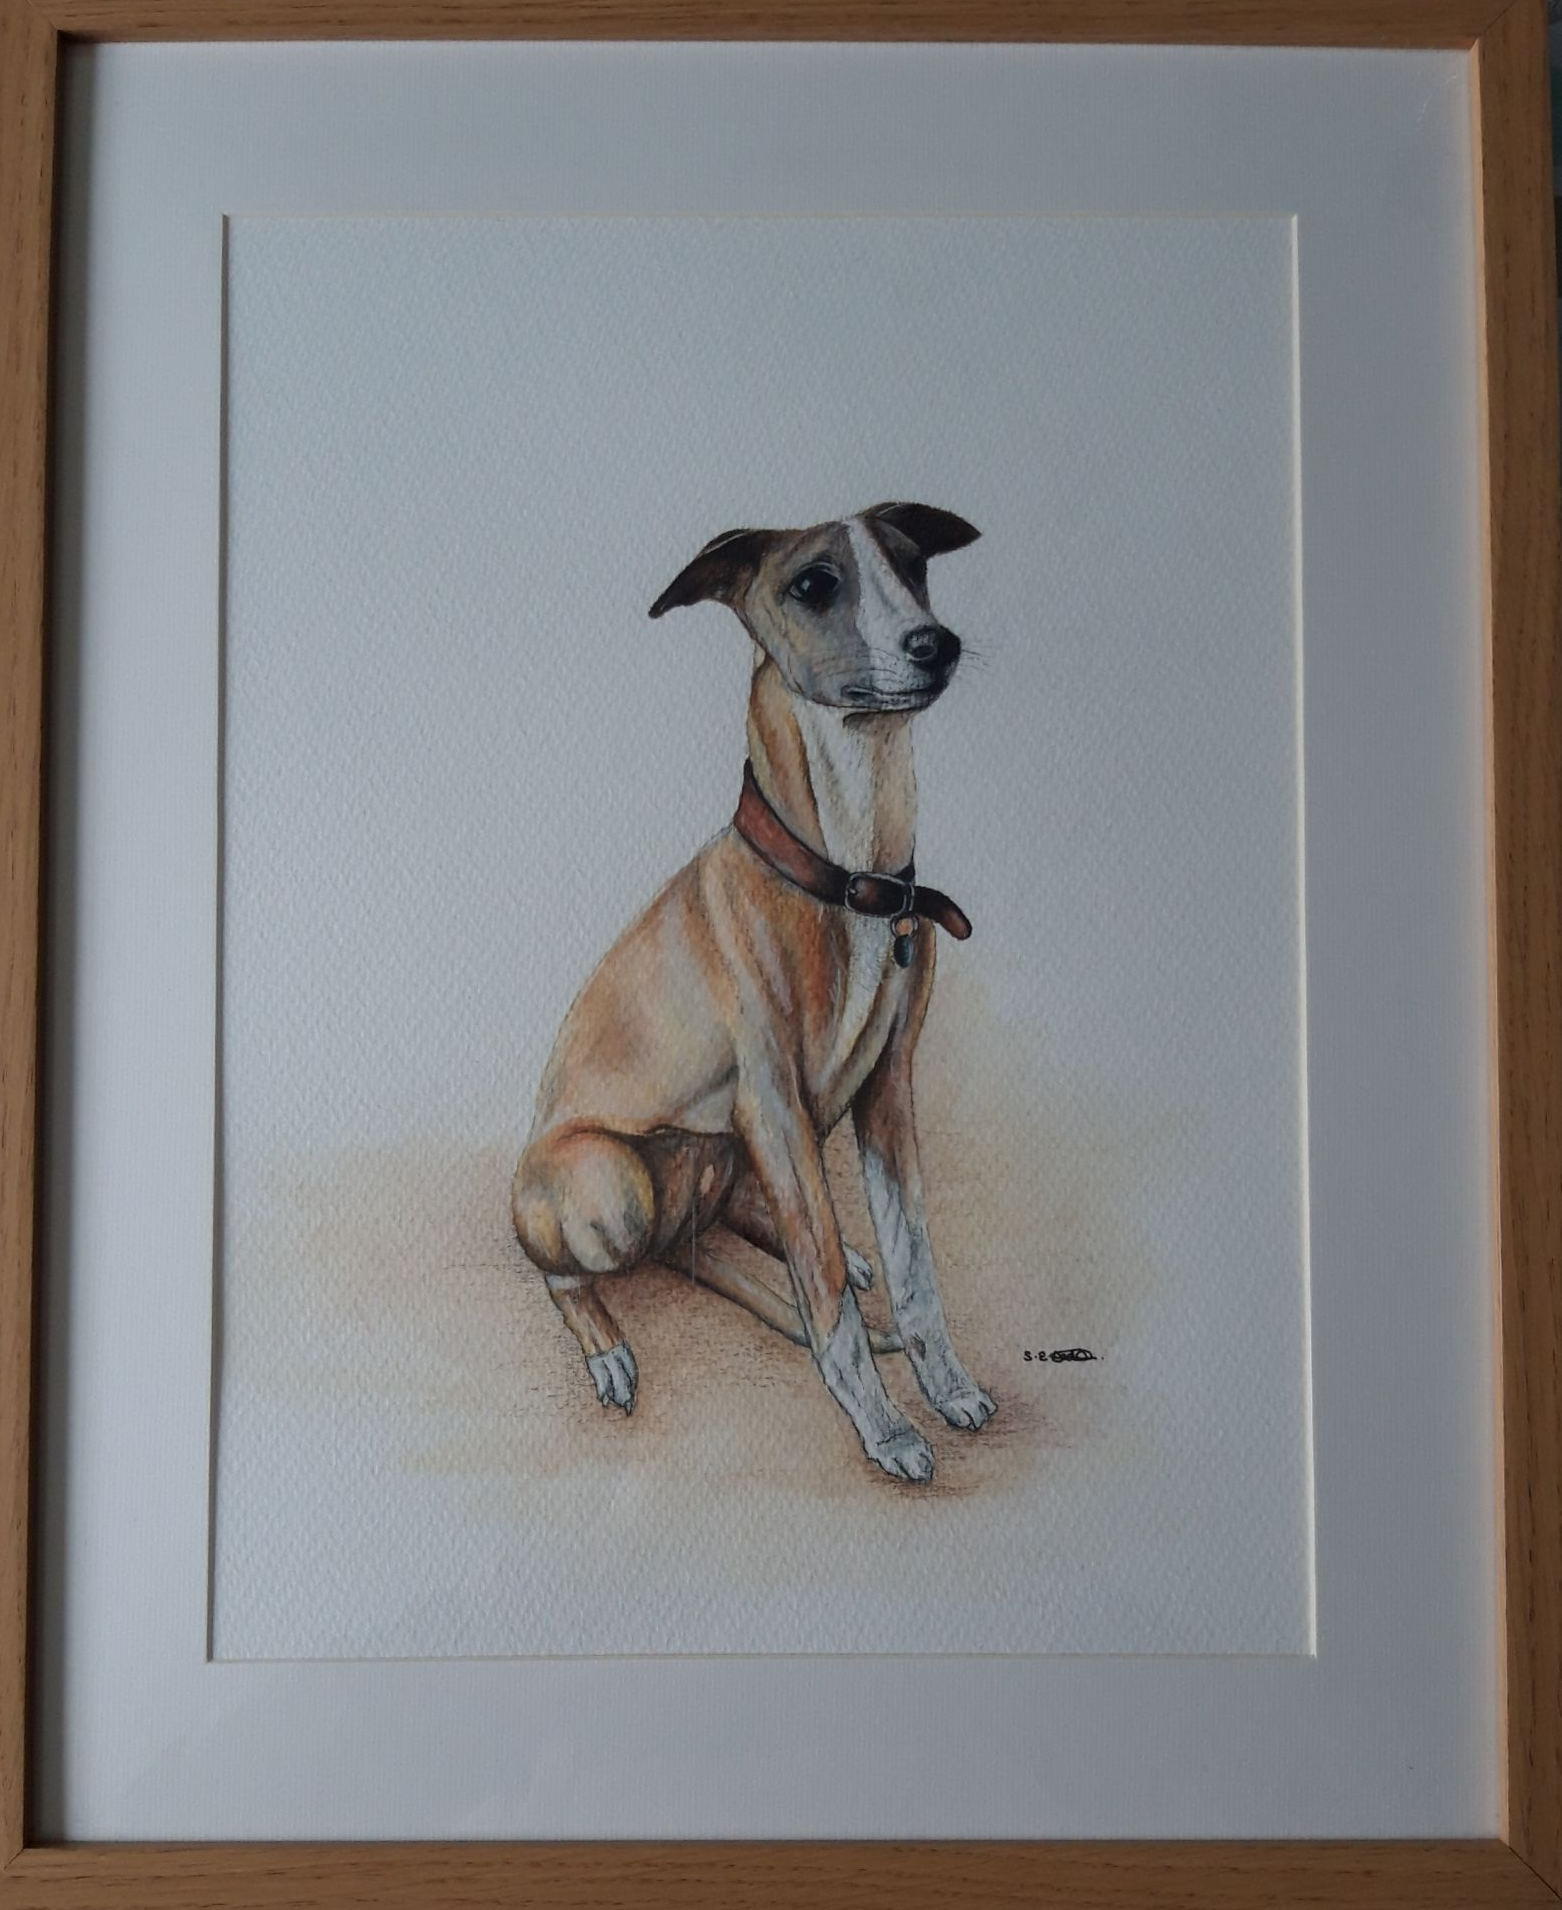 Pet Portrait Commission completed in watercolour pencils of a greyhound dog